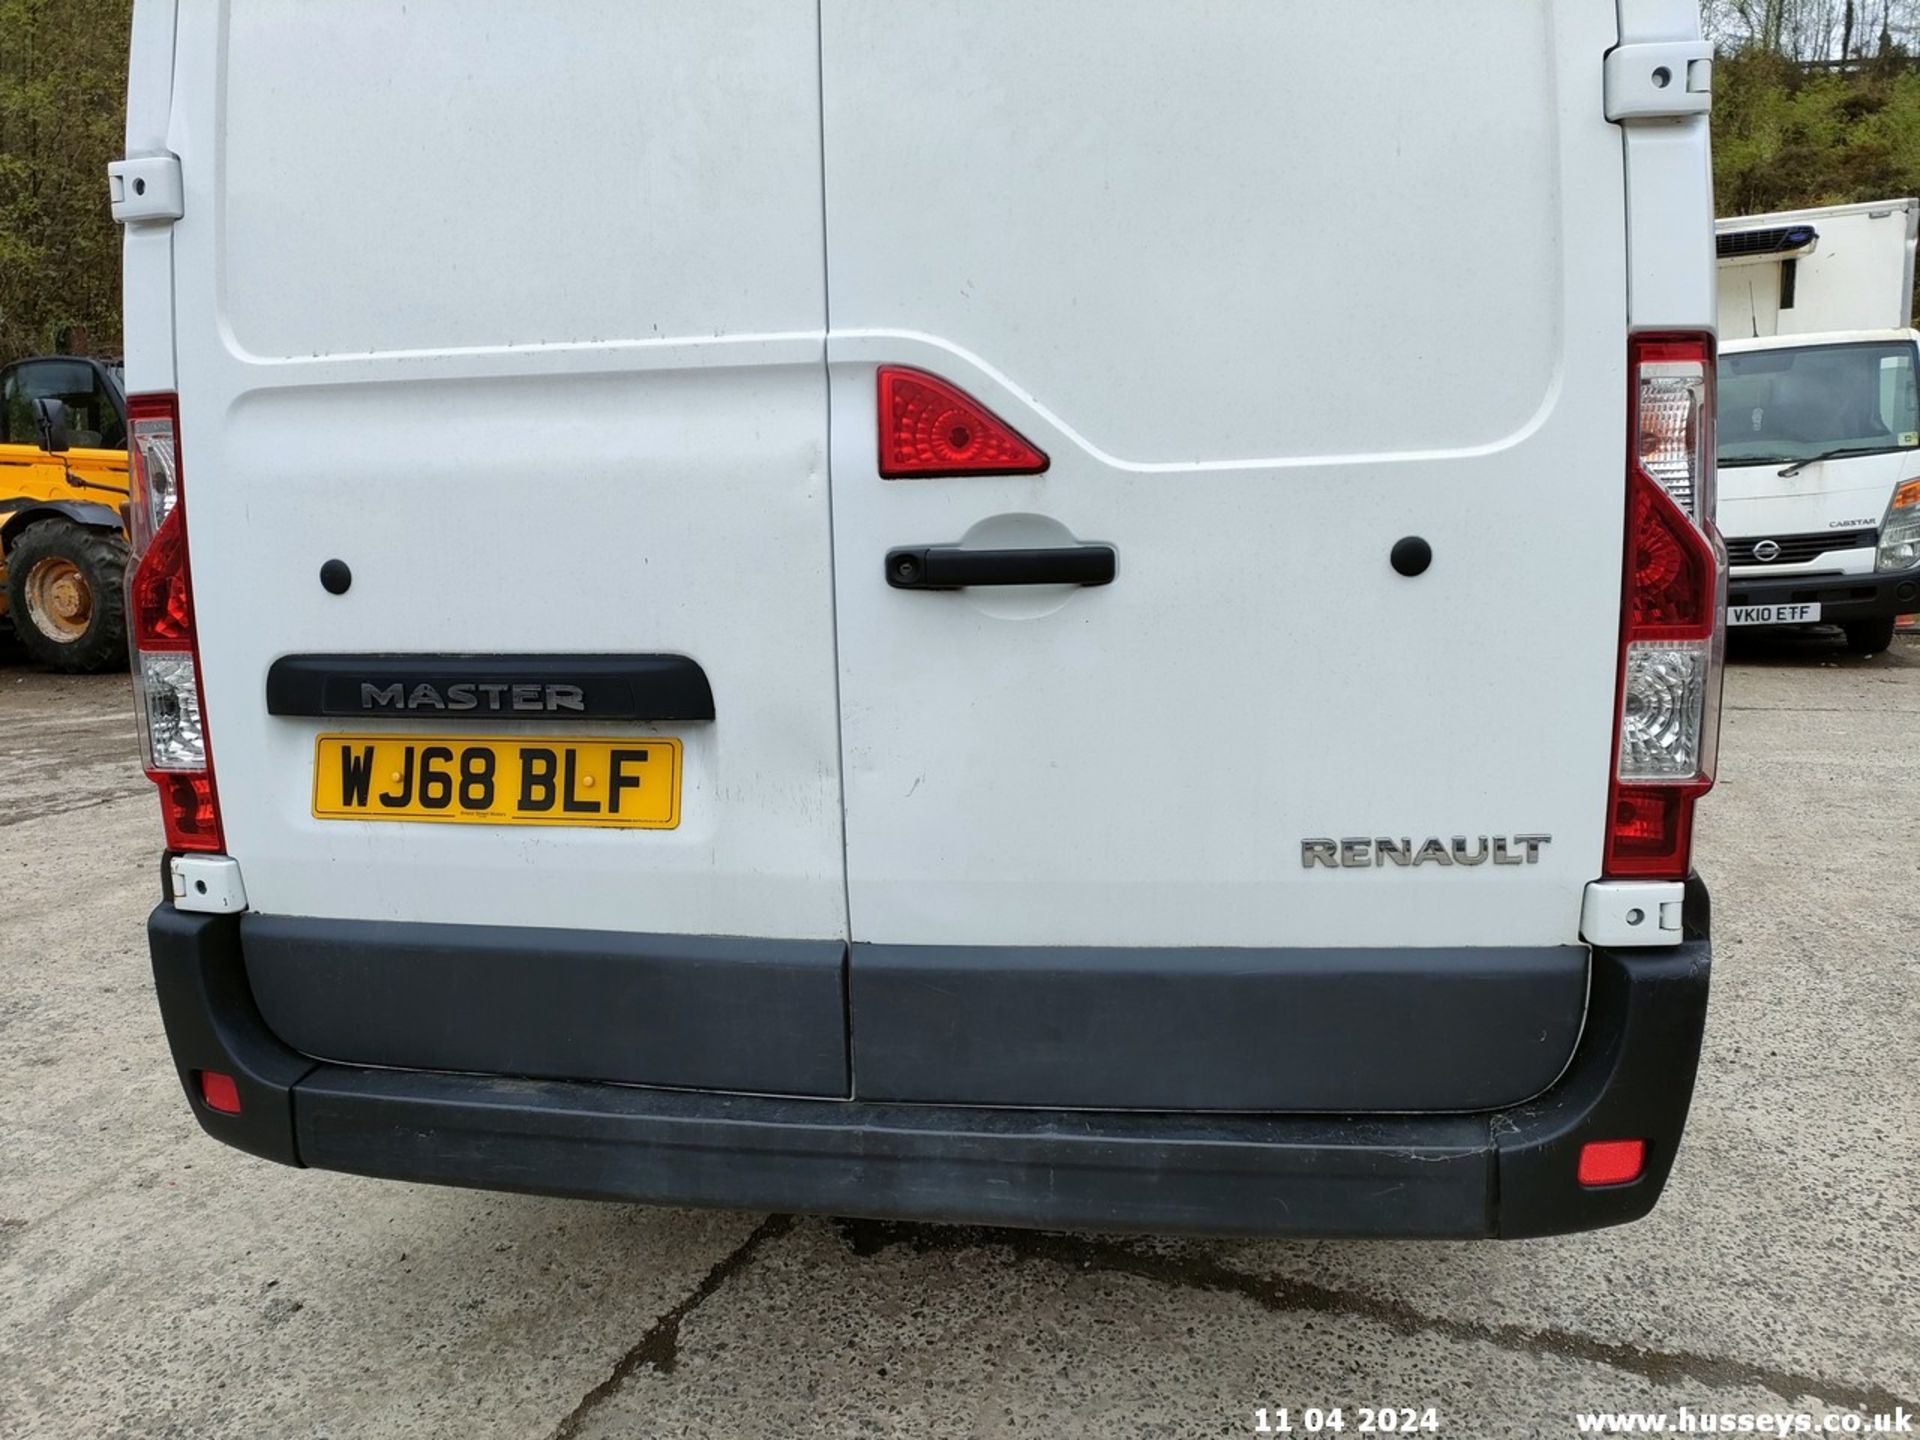 18/68 RENAULT MASTER LM35 BUSINESS DCI - 2298cc 5dr Van (White) - Image 38 of 68